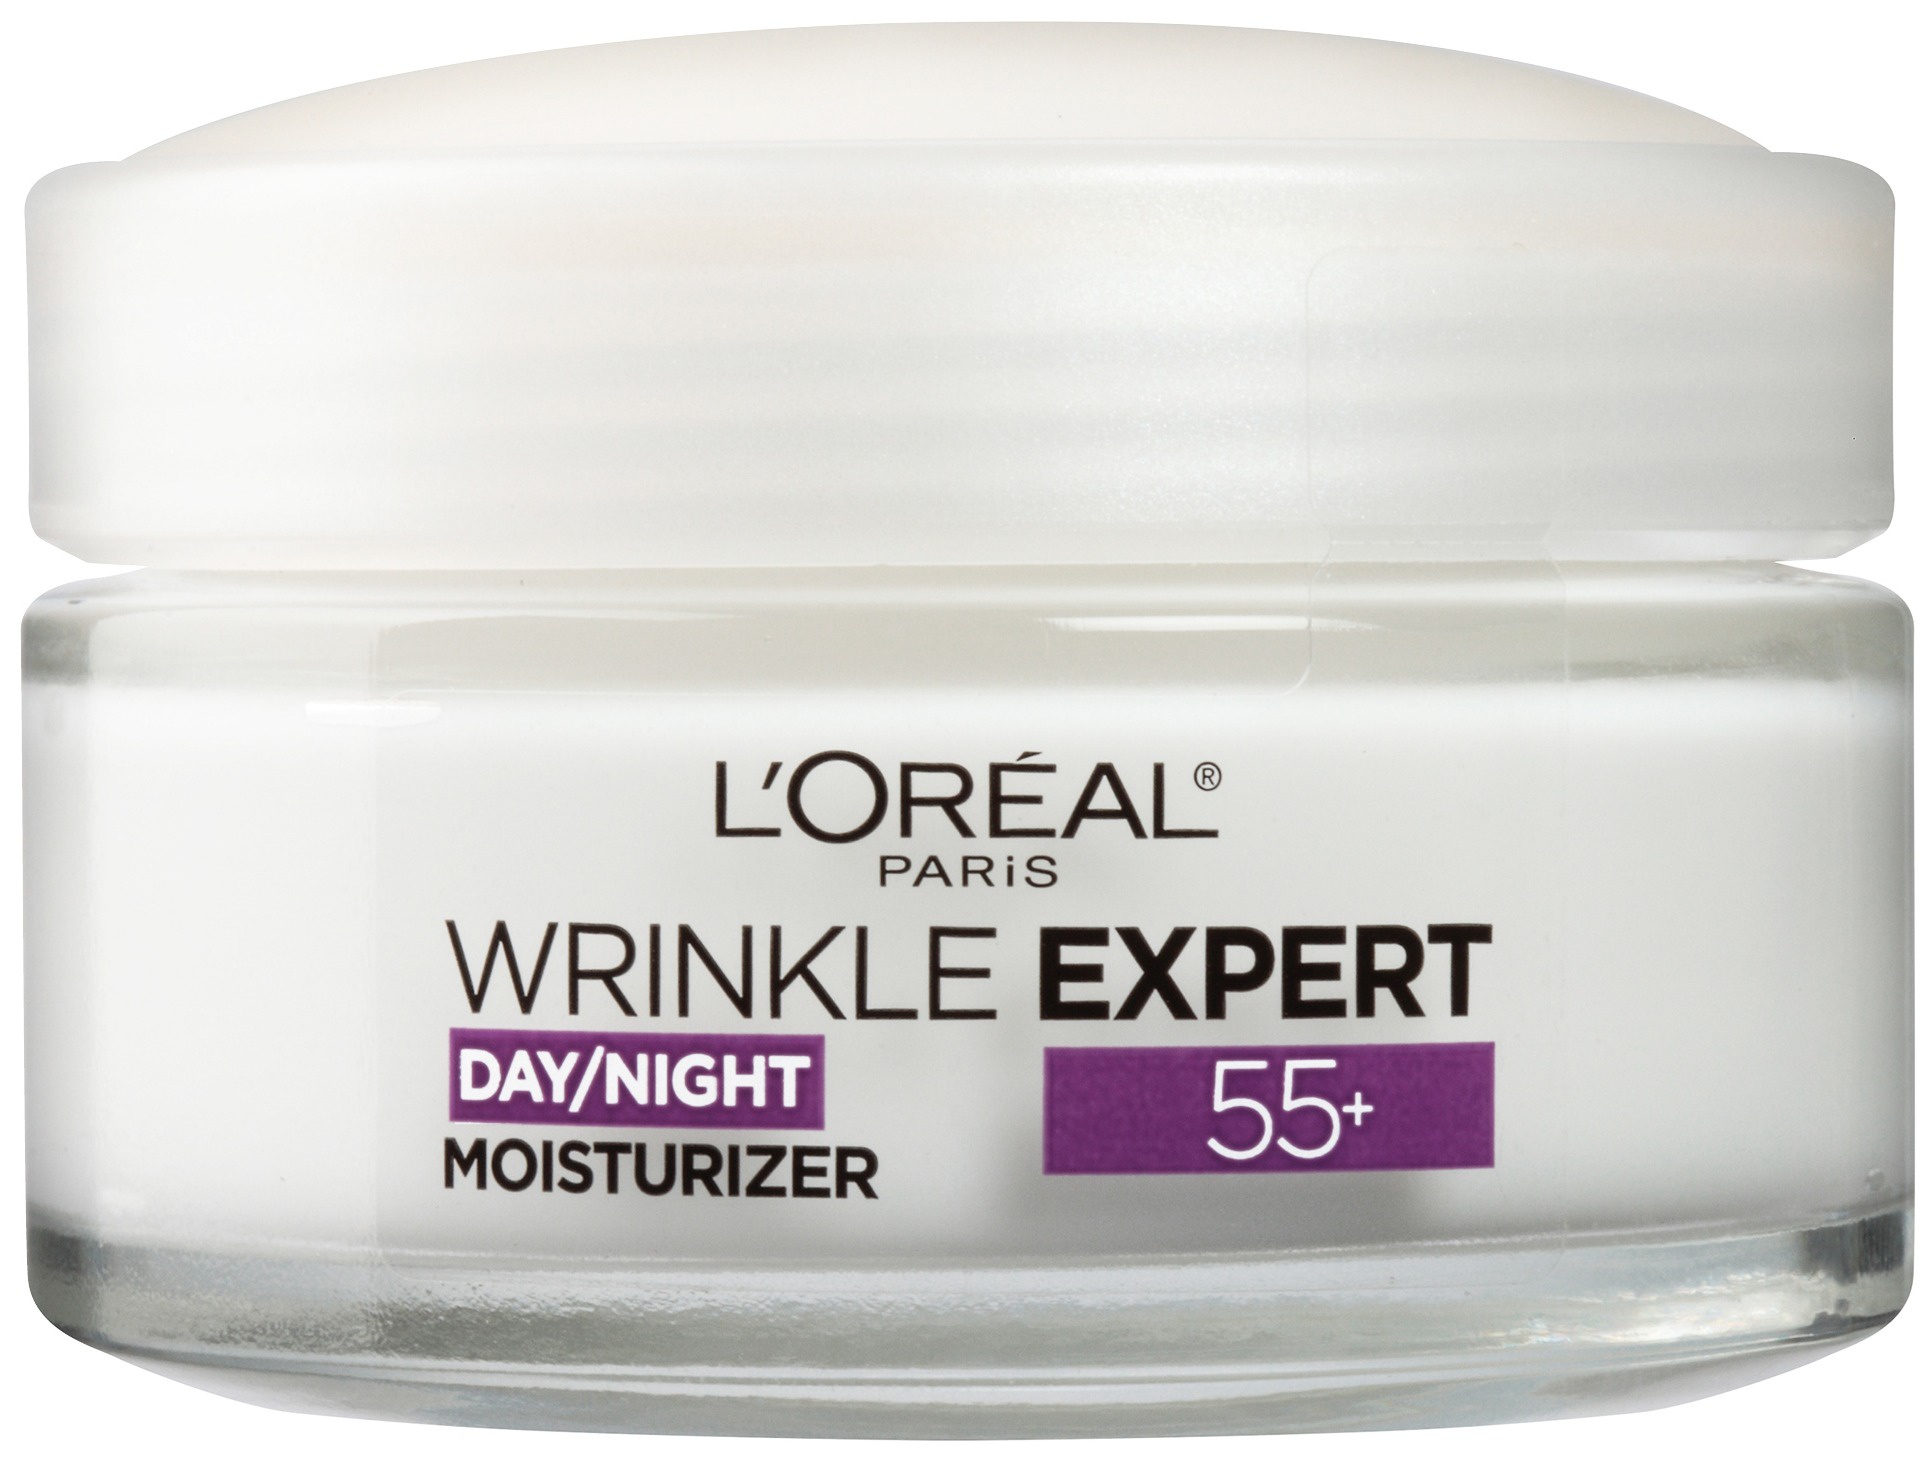 L'Oreal Wrinkle Expert Day/Night 55+